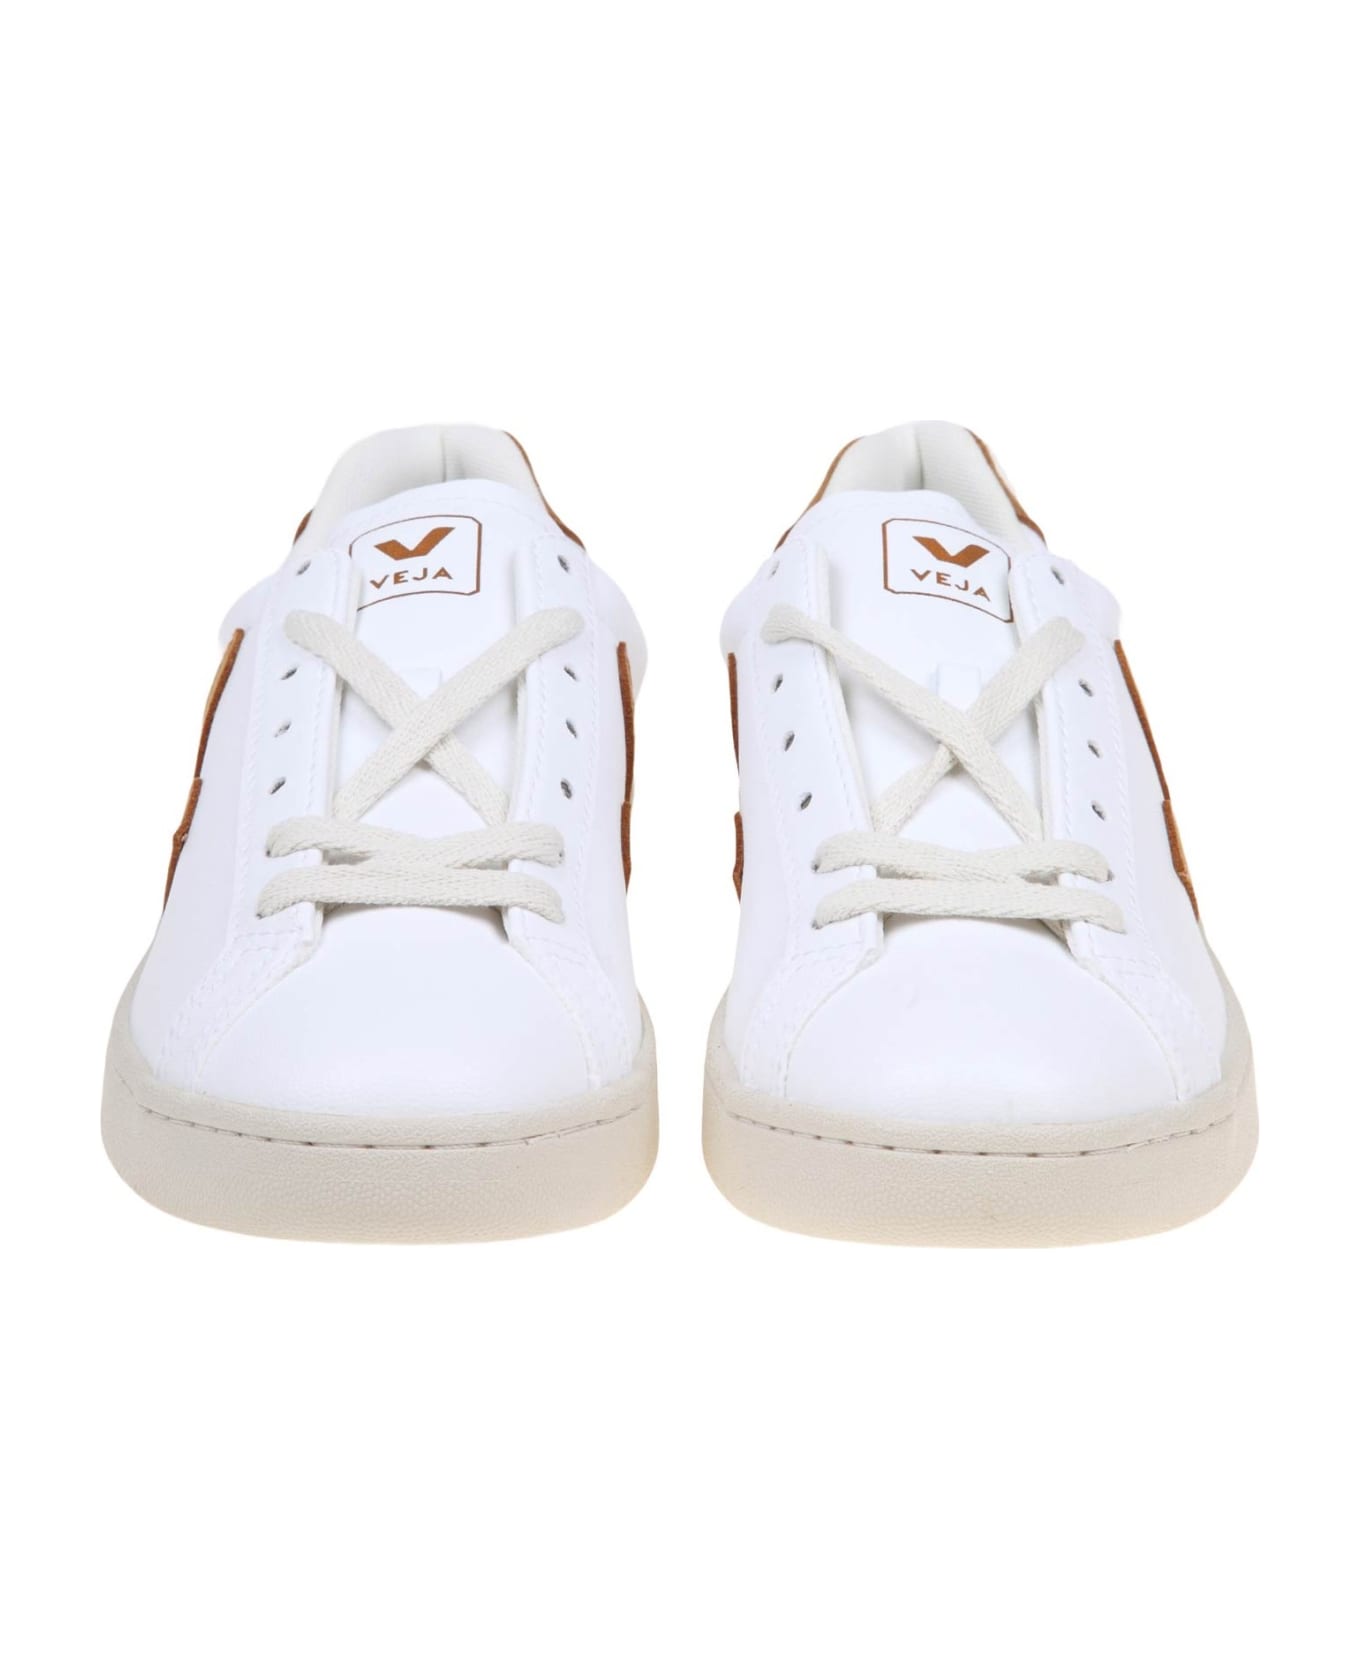 Veja Urca Sneakers In White Coated Cotton - WHITE/CAMEL